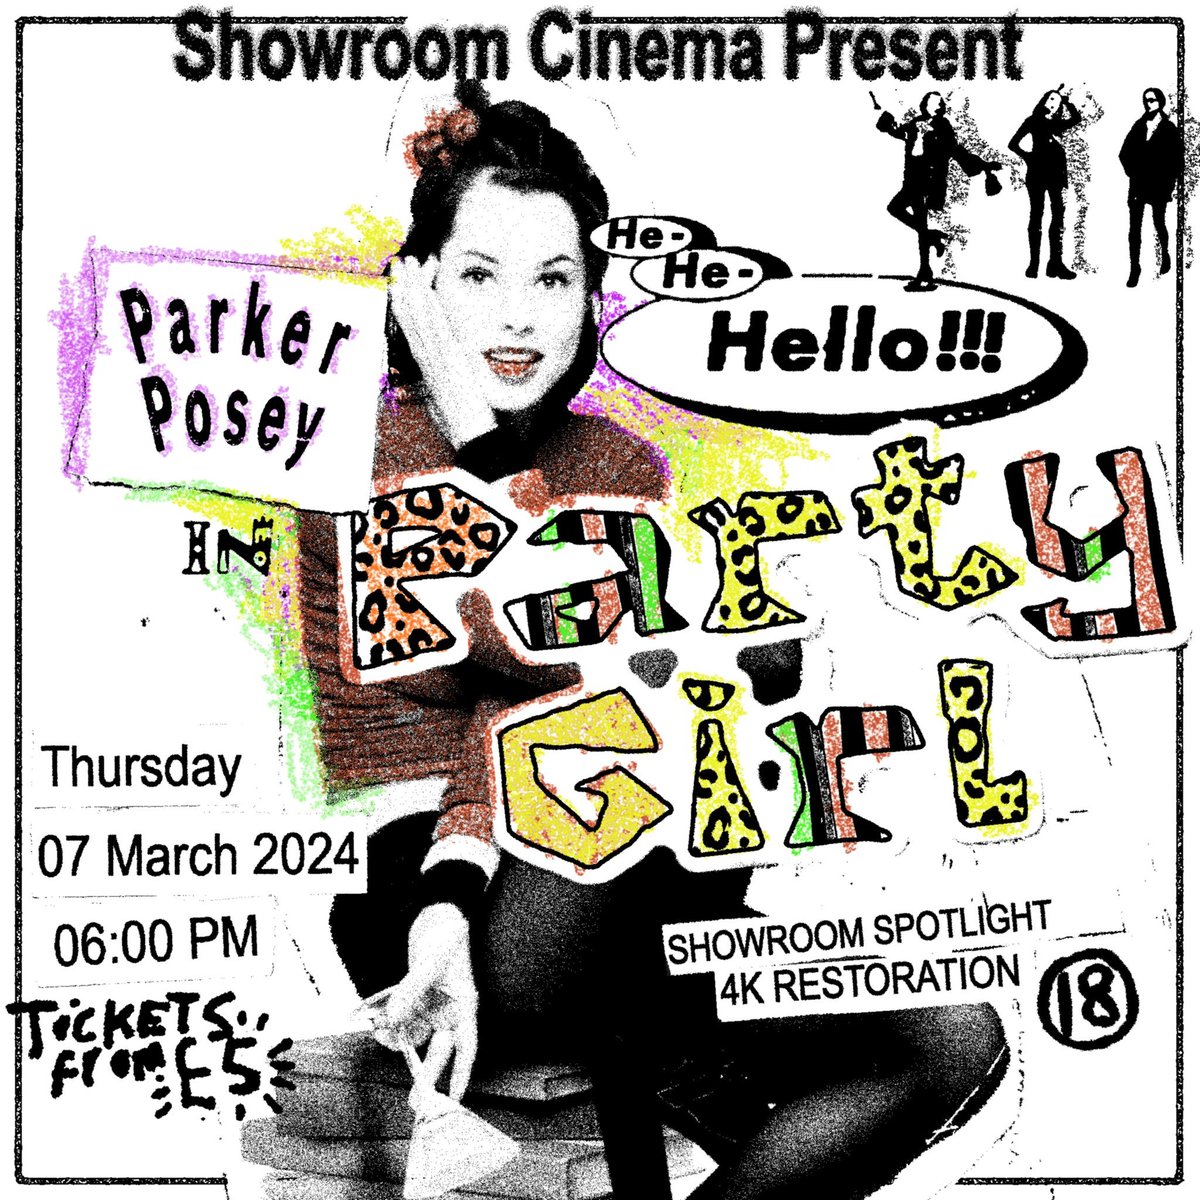 Reposting this because it's tomorrow and it's a one off chance to see Party Girl in 4K at the cinema!

(also I did a nice flyer for it)

#partygirl #parkerposey #sheffield